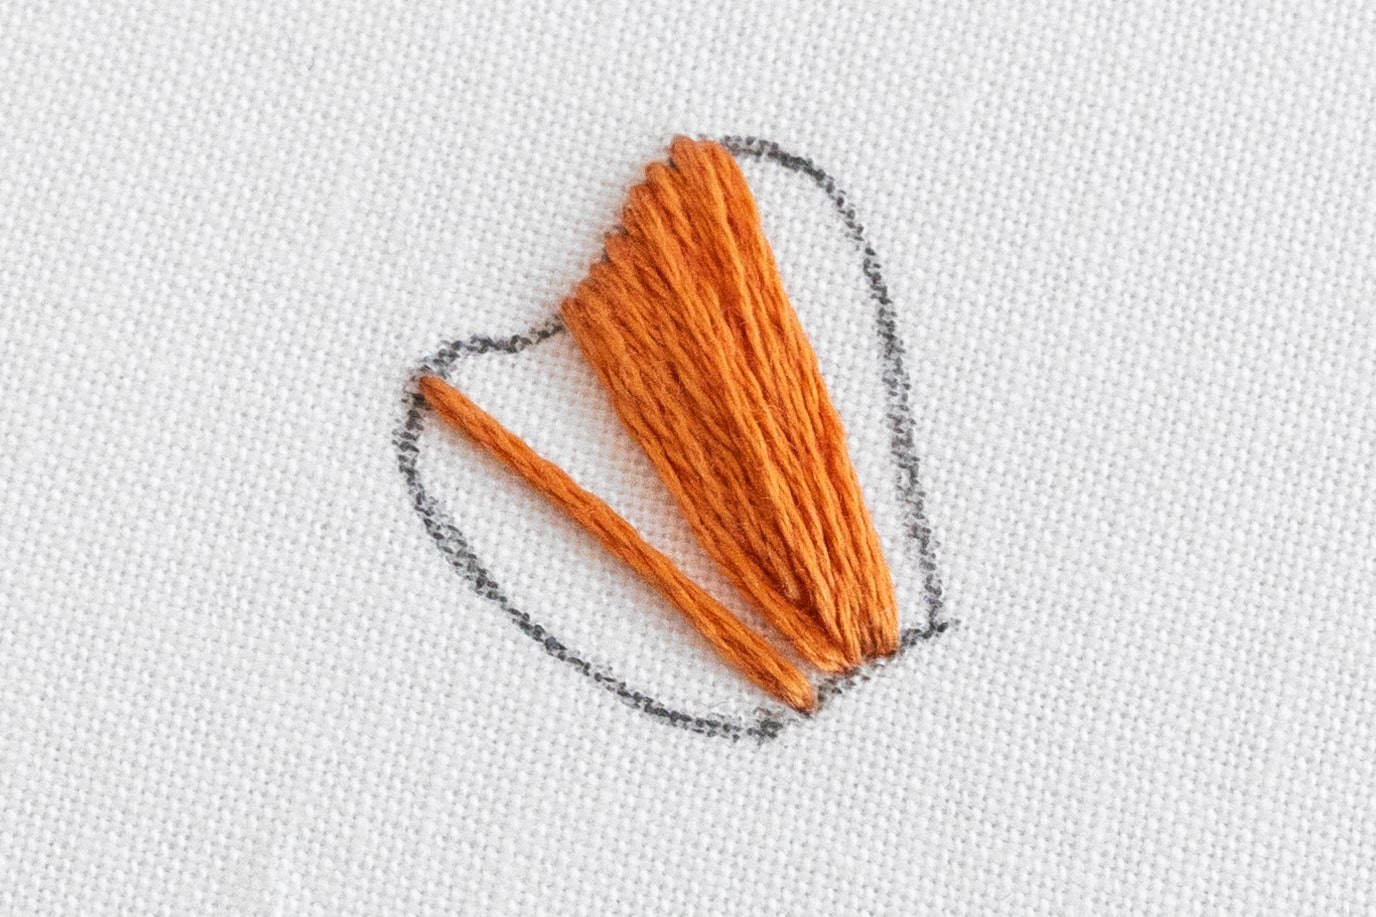 An area of satin stitch has been created.